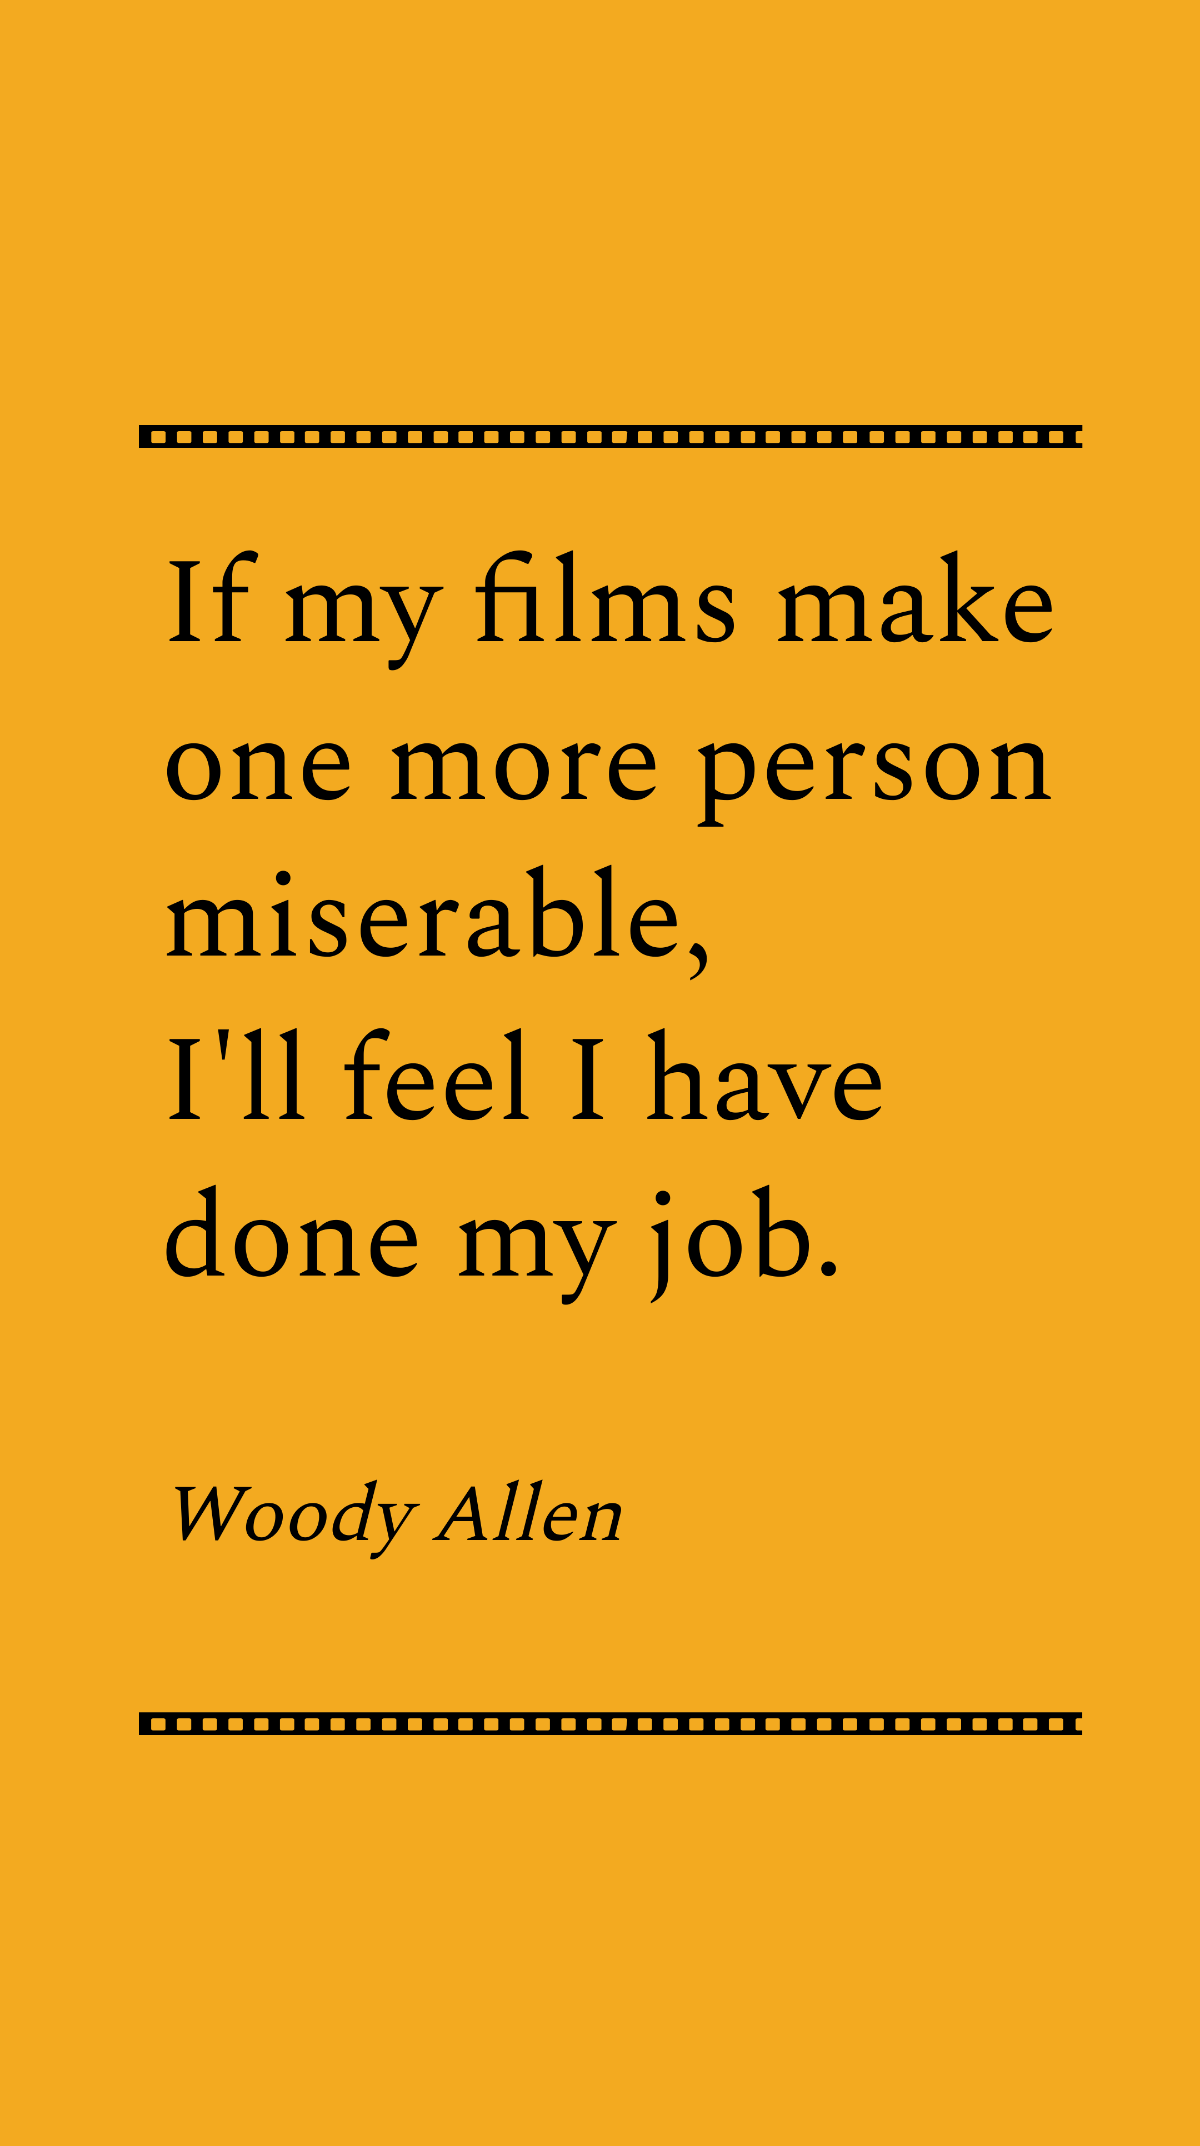 Woody Allen - If my films make one more person miserable, I'll feel I have done my job. Template